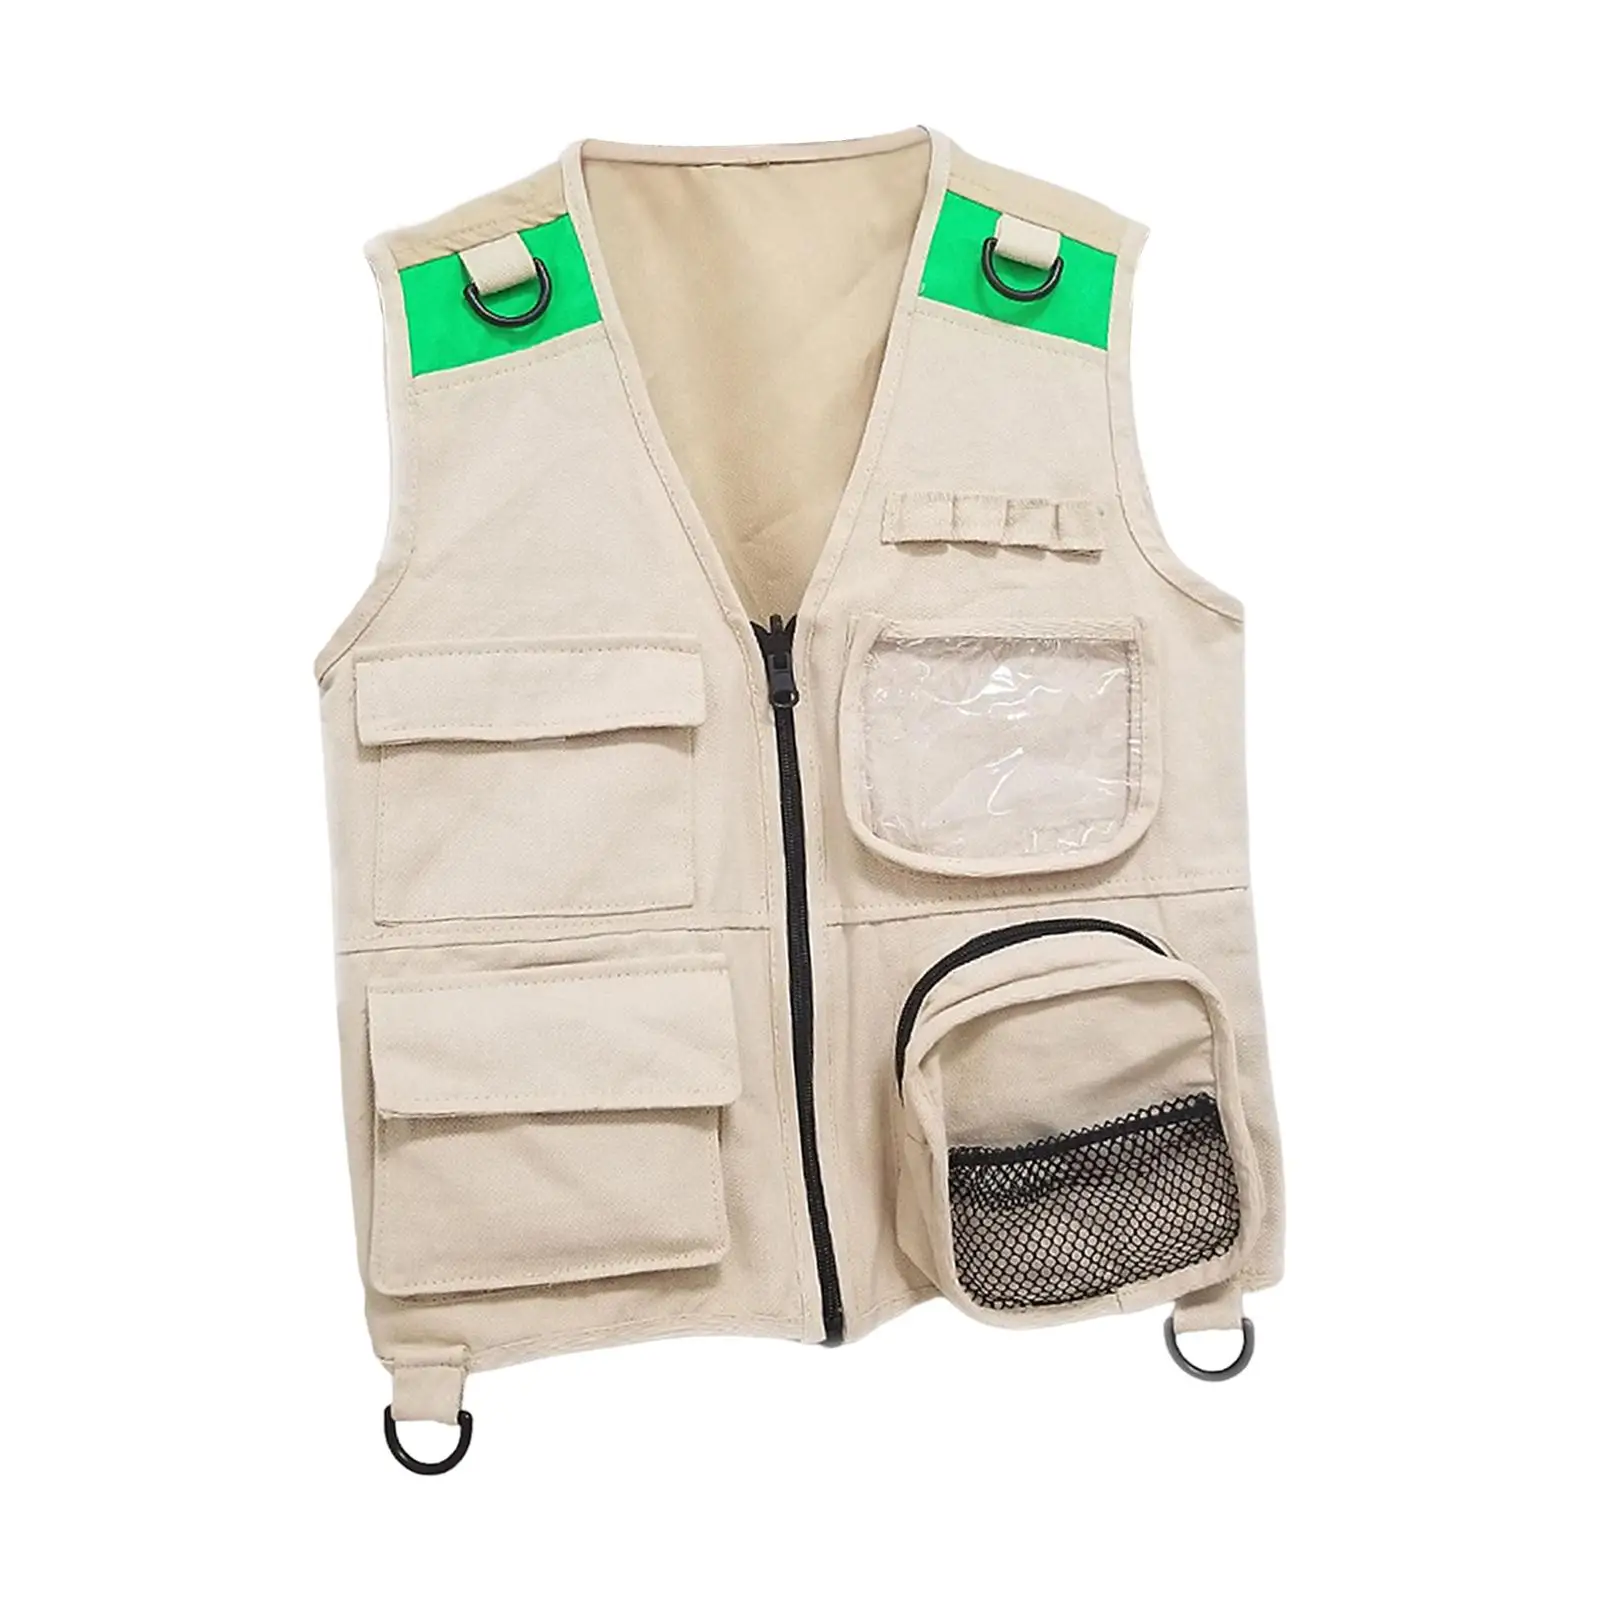 Kids Explorer Costume Vest with 4 Pockets Outdoor Activity for Fishing